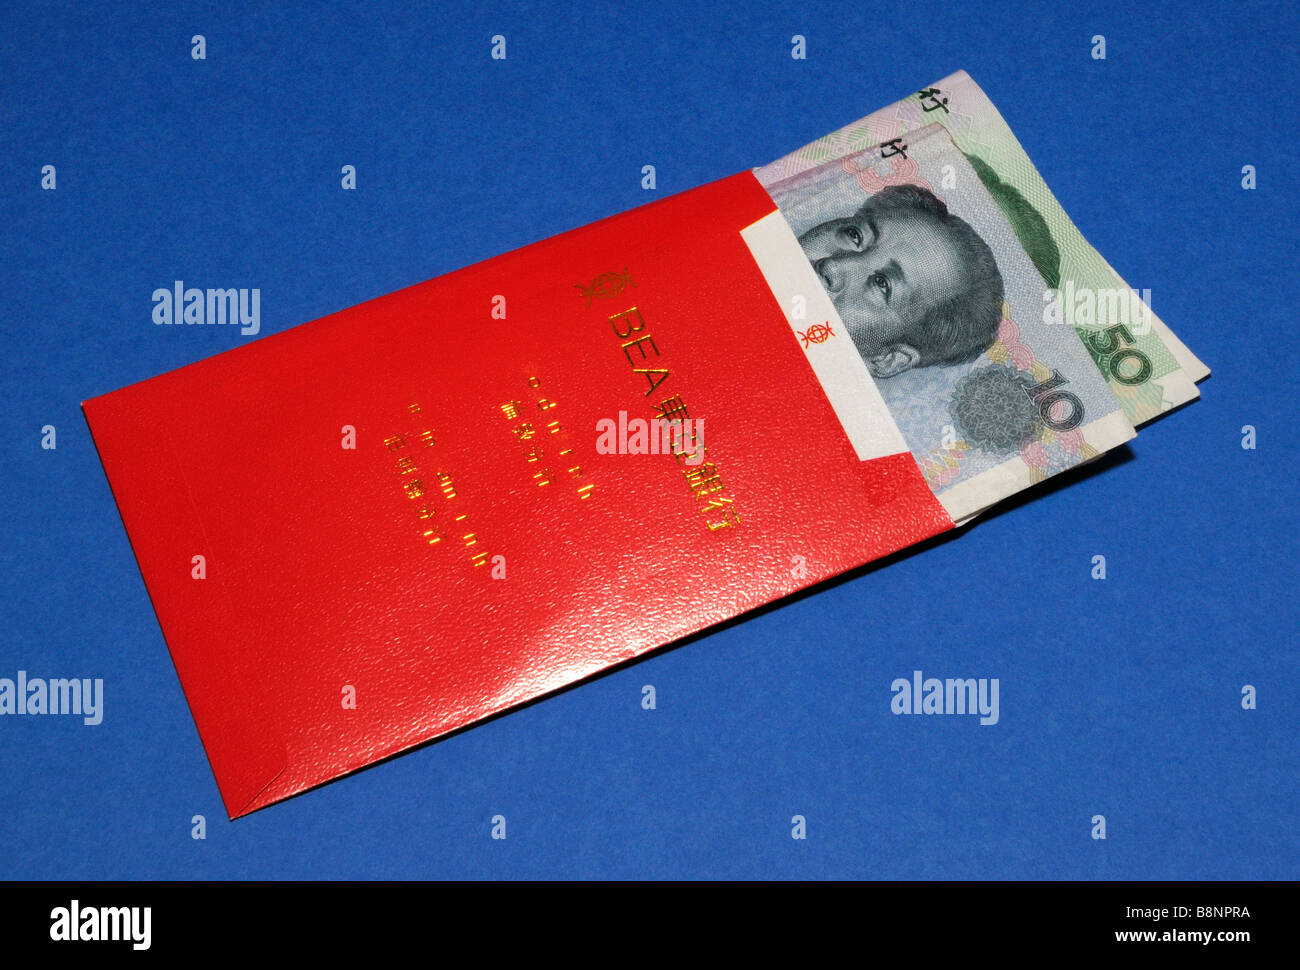 Red Envelope Containing Money, Usually Given at Chinese New Year Stock Photo